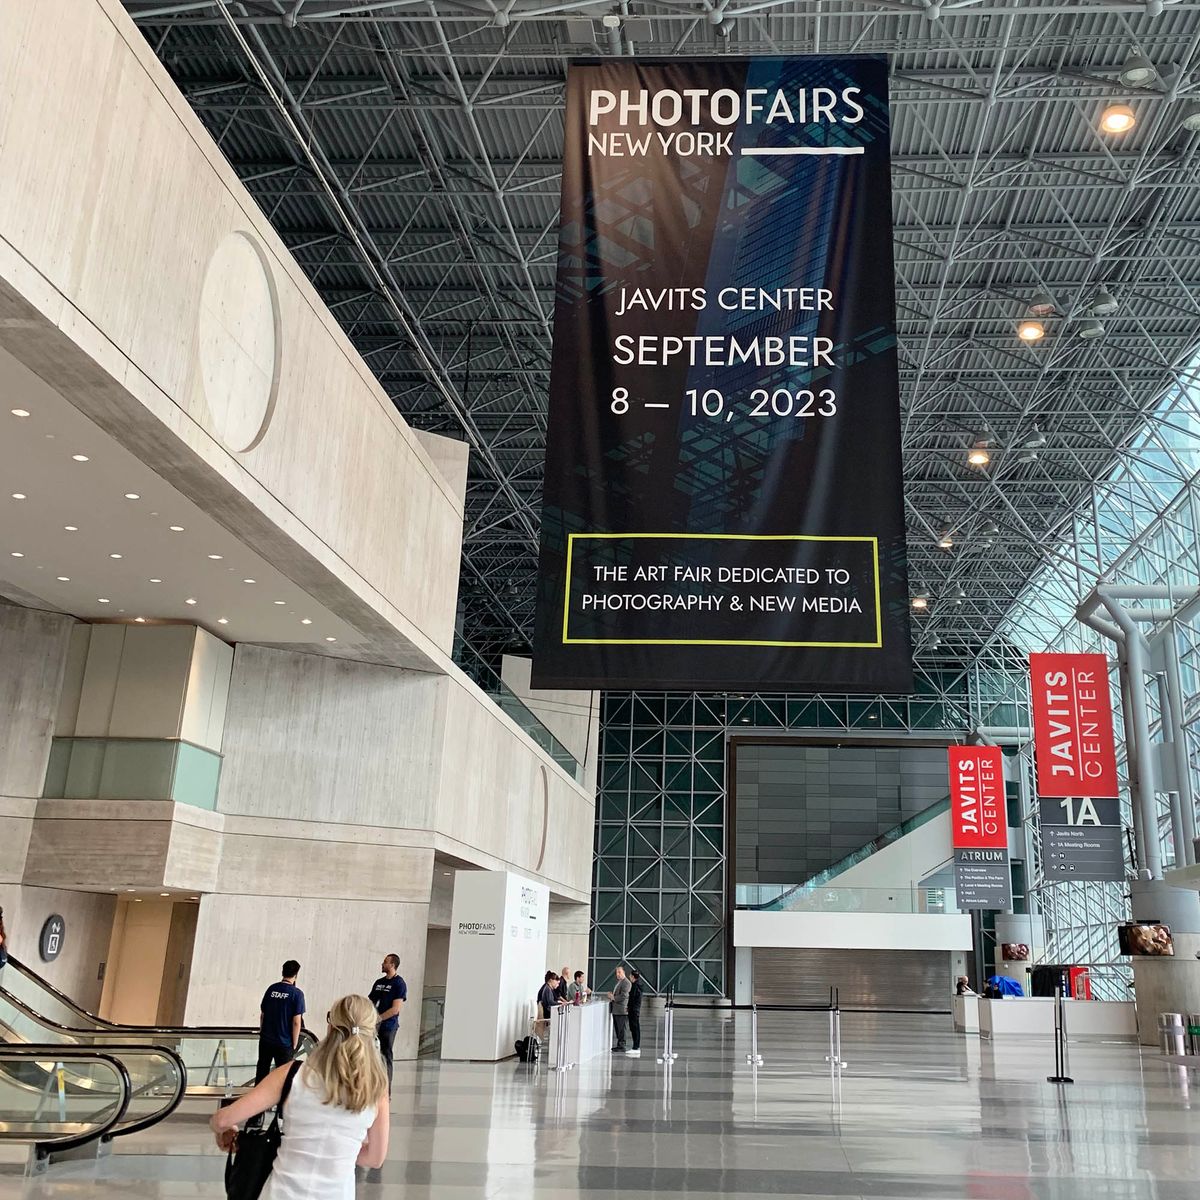 The main entrance to the inaugural edition of Photofairs New York in September 2023 Benjamin Sutton